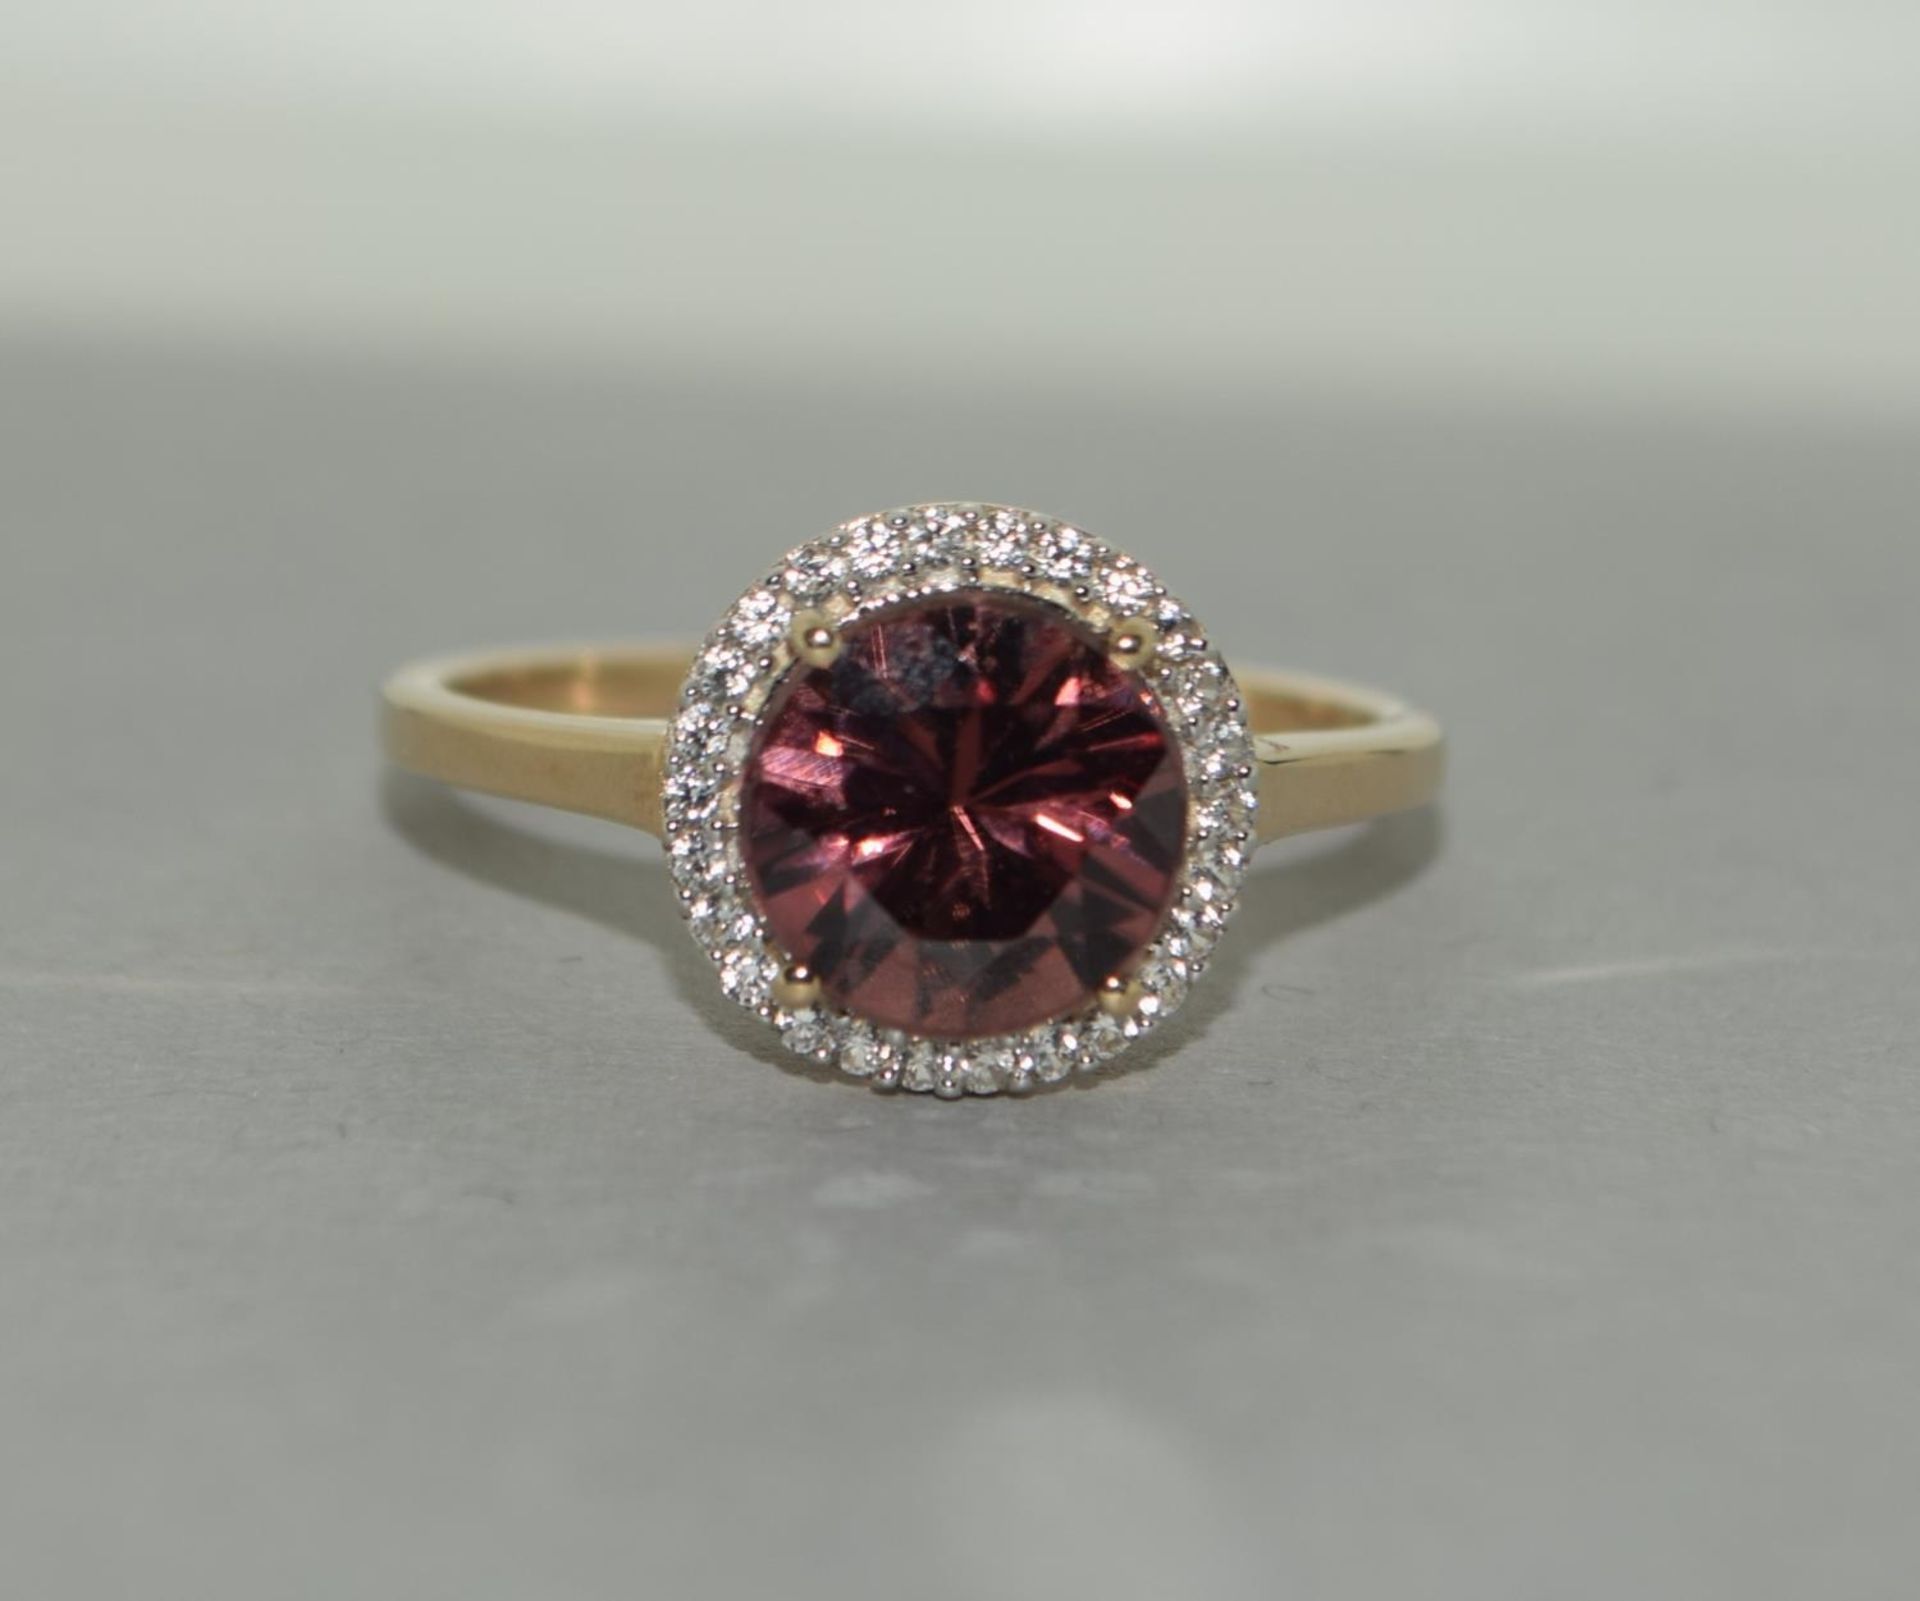 A 9ct gold natural pink zircon ring Size N 1/2.